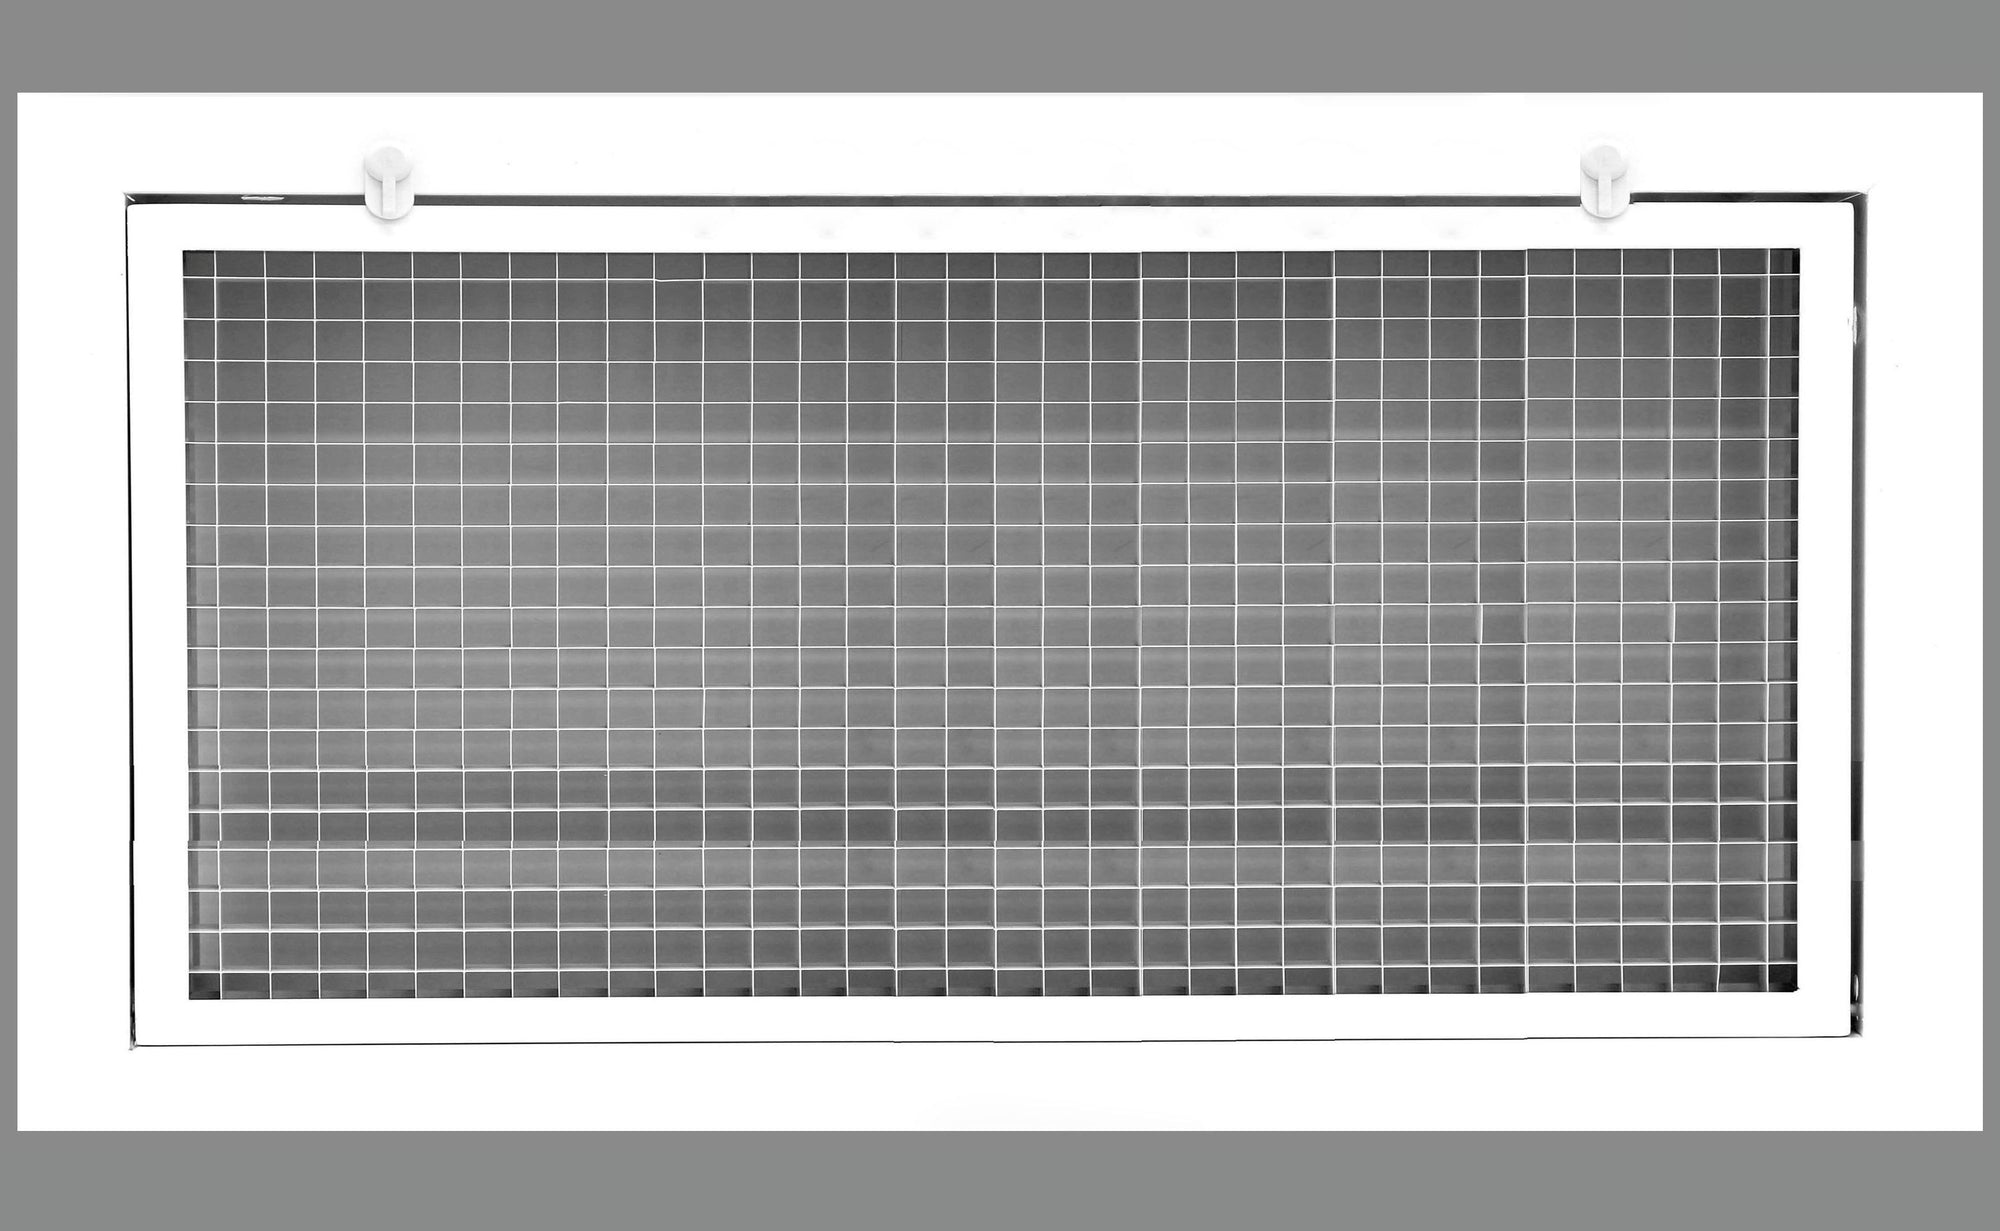 30" x 12" Cube Core Eggcrate Return Air Filter Grille for 1" Filter